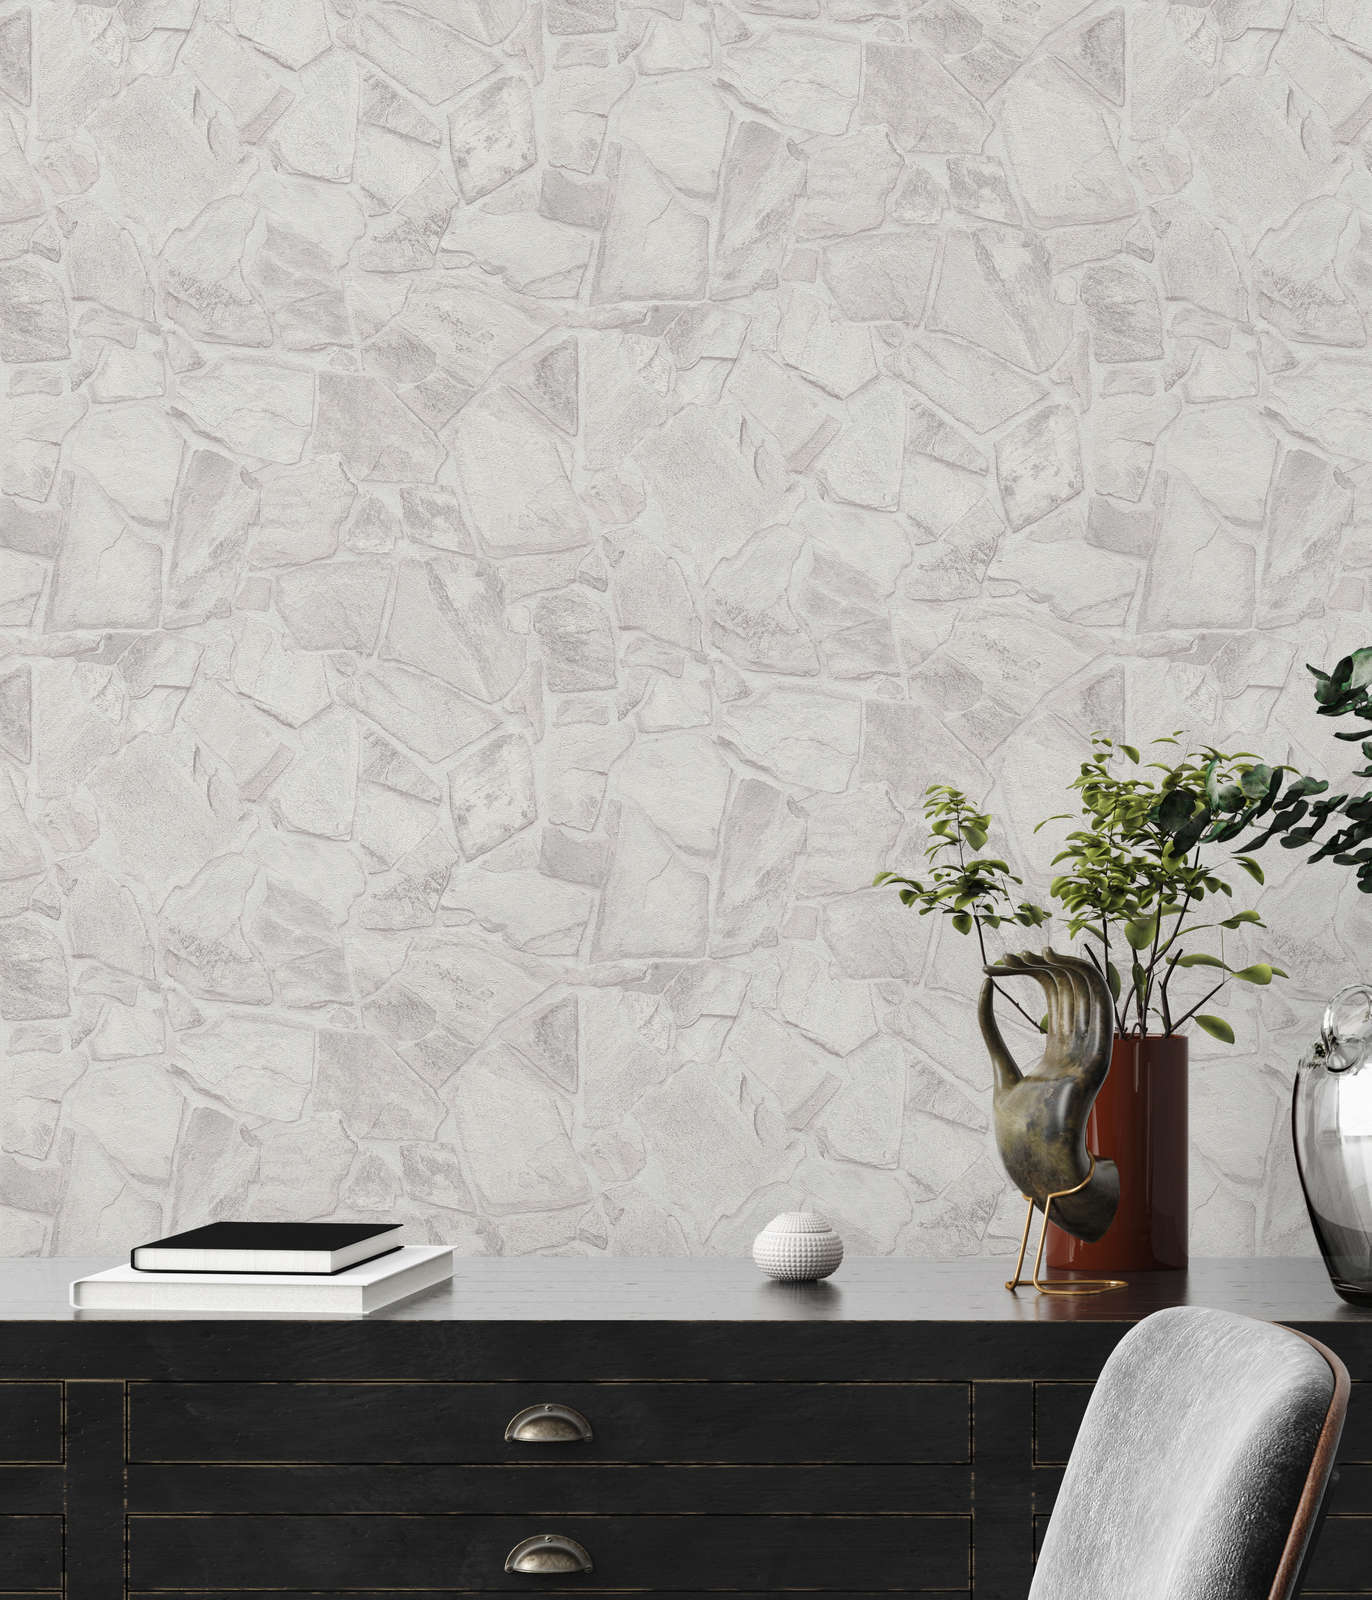             Stone-look non-woven wallpaper with 3D effect brickwork - grey, white, grey
        